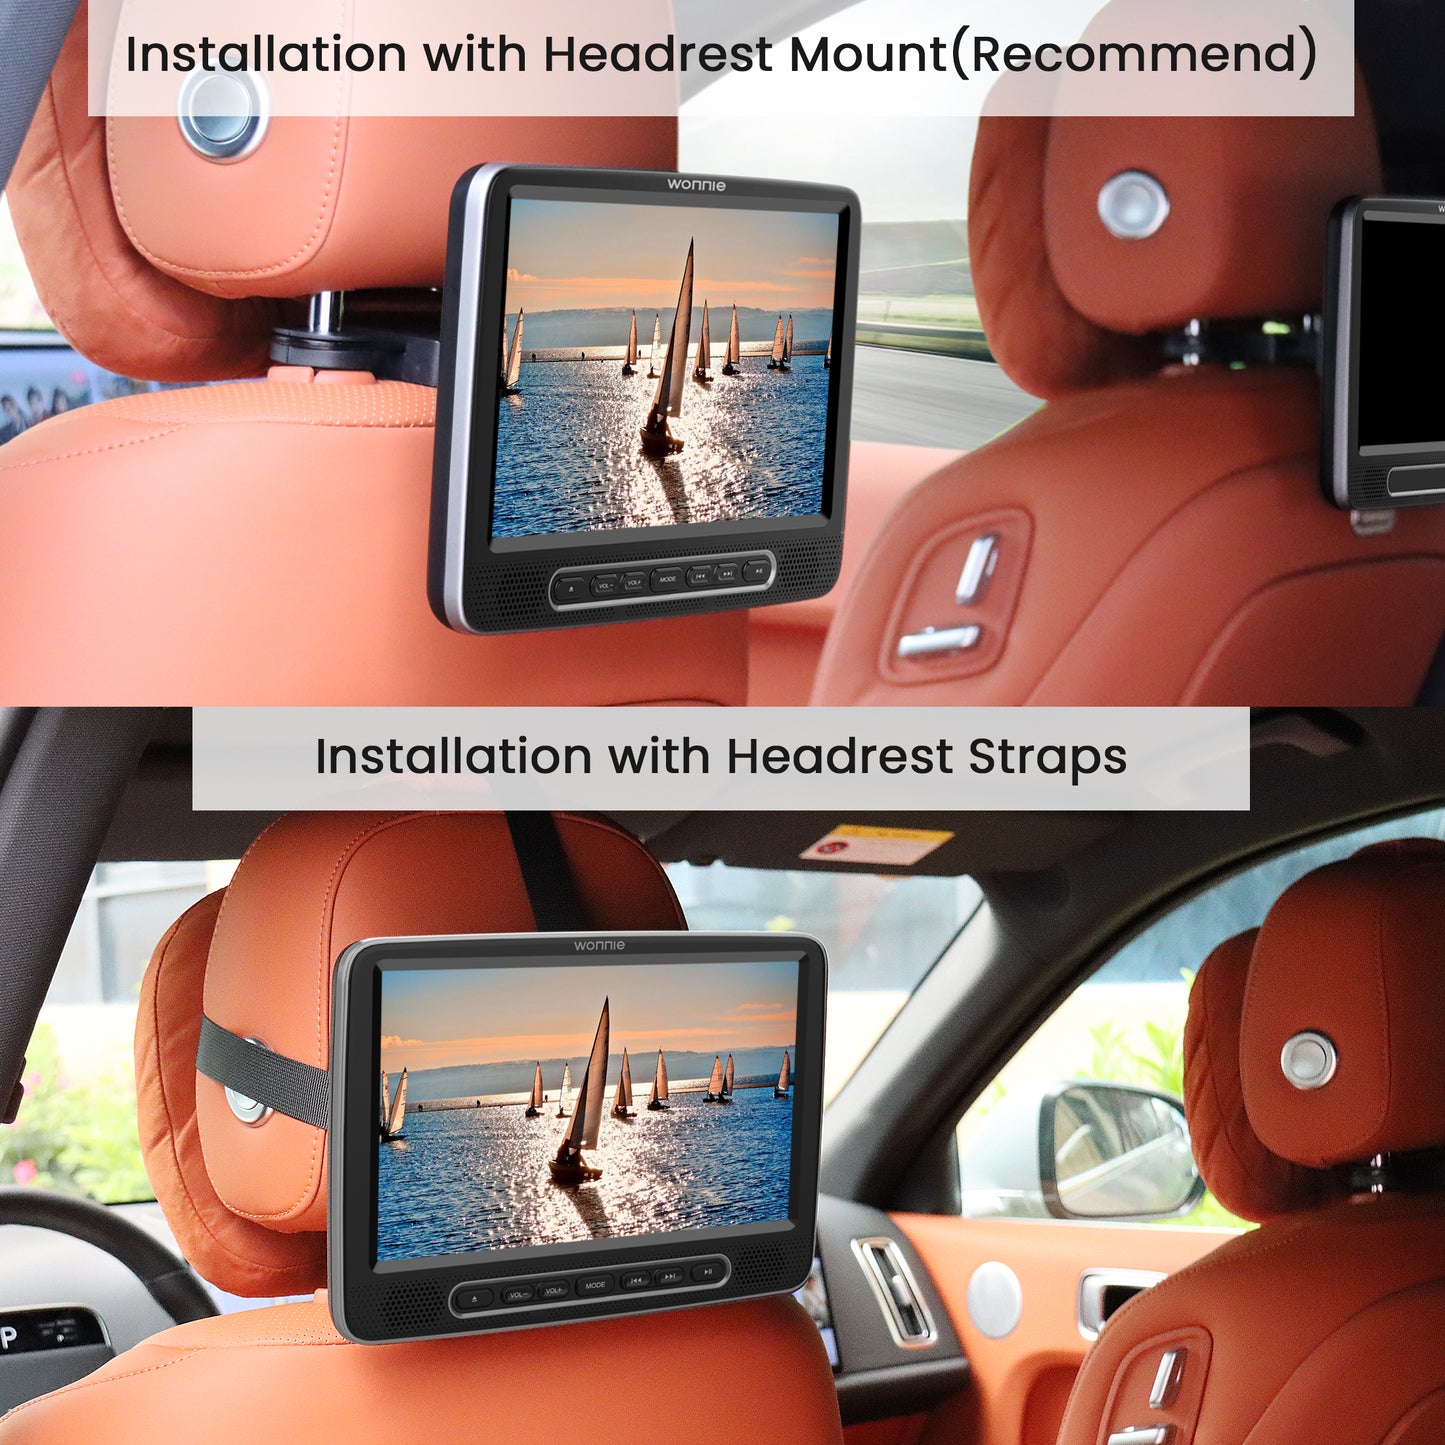 WONNIE 10.5" Dual Screen Portable Headrest DVD Player with Mounting Bracket and Mounting Straps,Car DVD Player Suction-Type Disc in , Full HD 1080P Video,Supports HDMI,USB ,SD,AV Out, Black